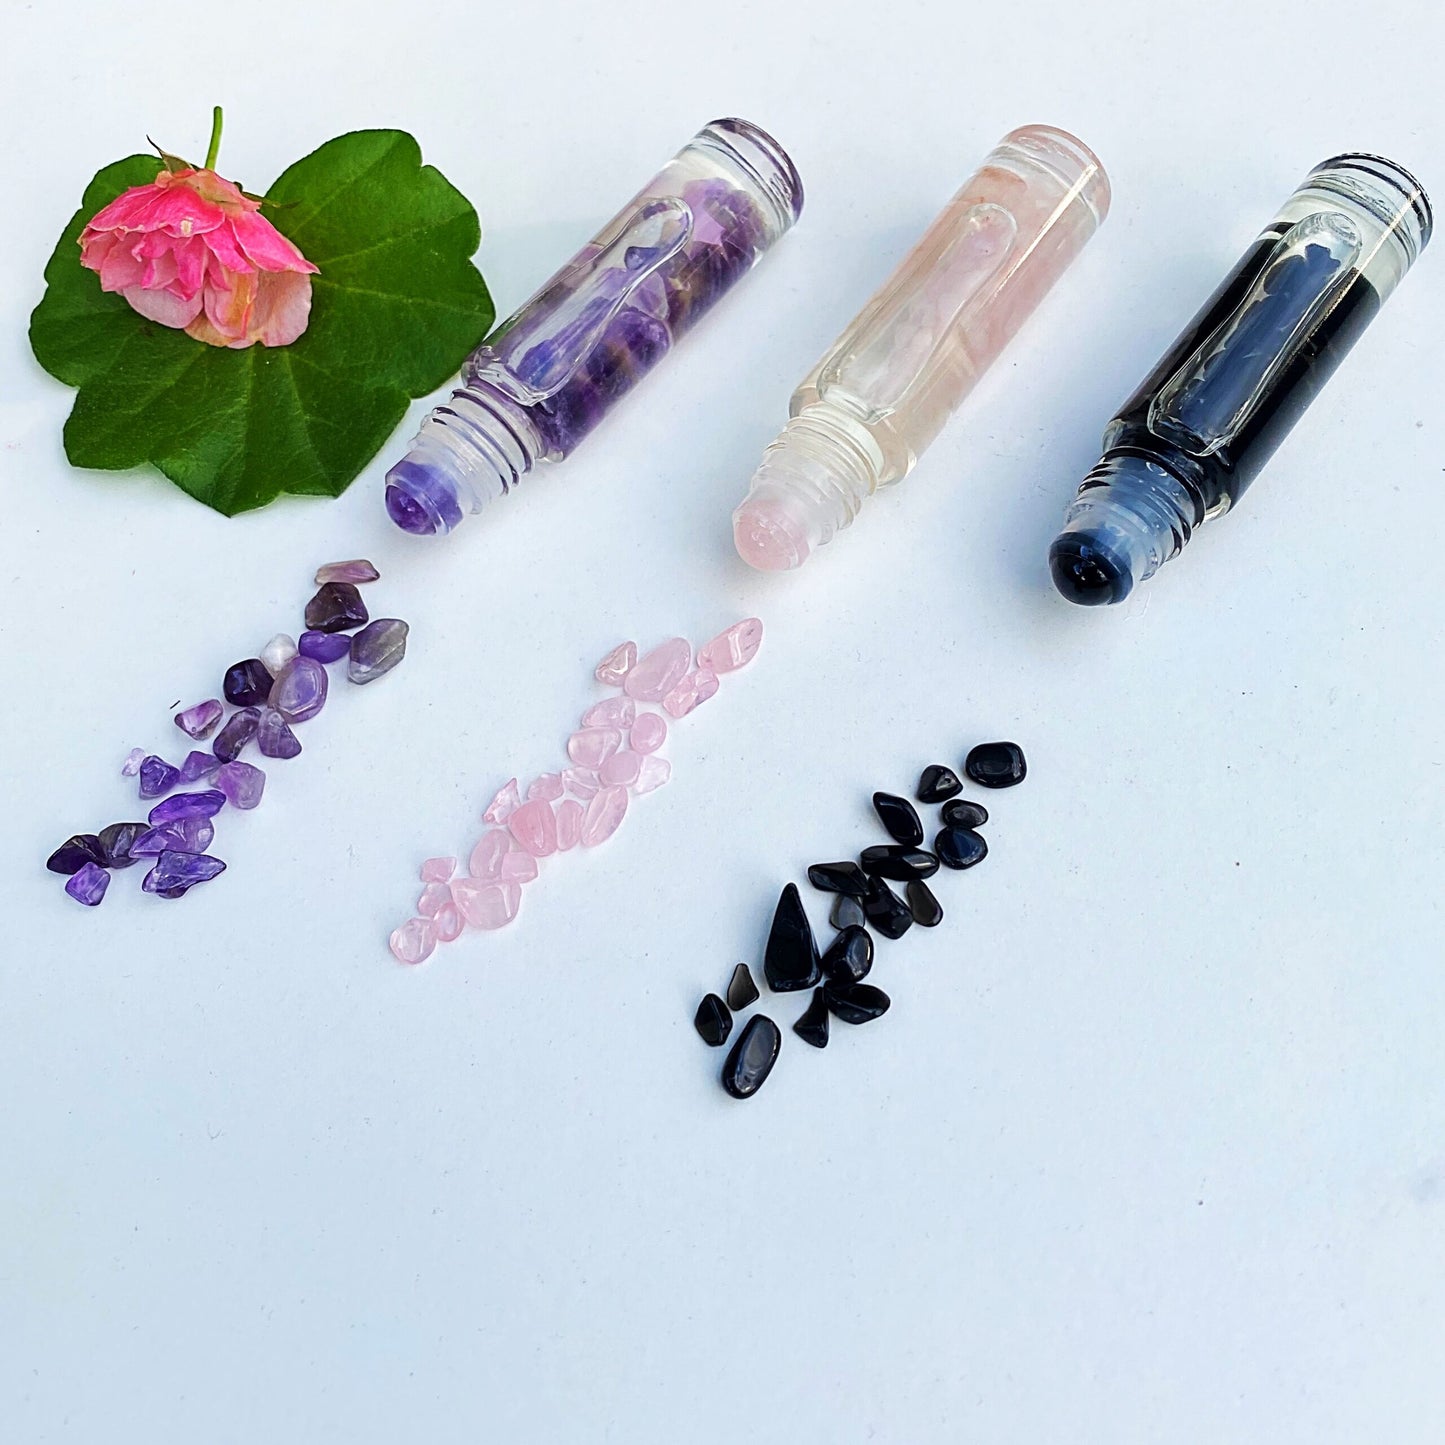 Crystal Roller Bottle and Essential Oil